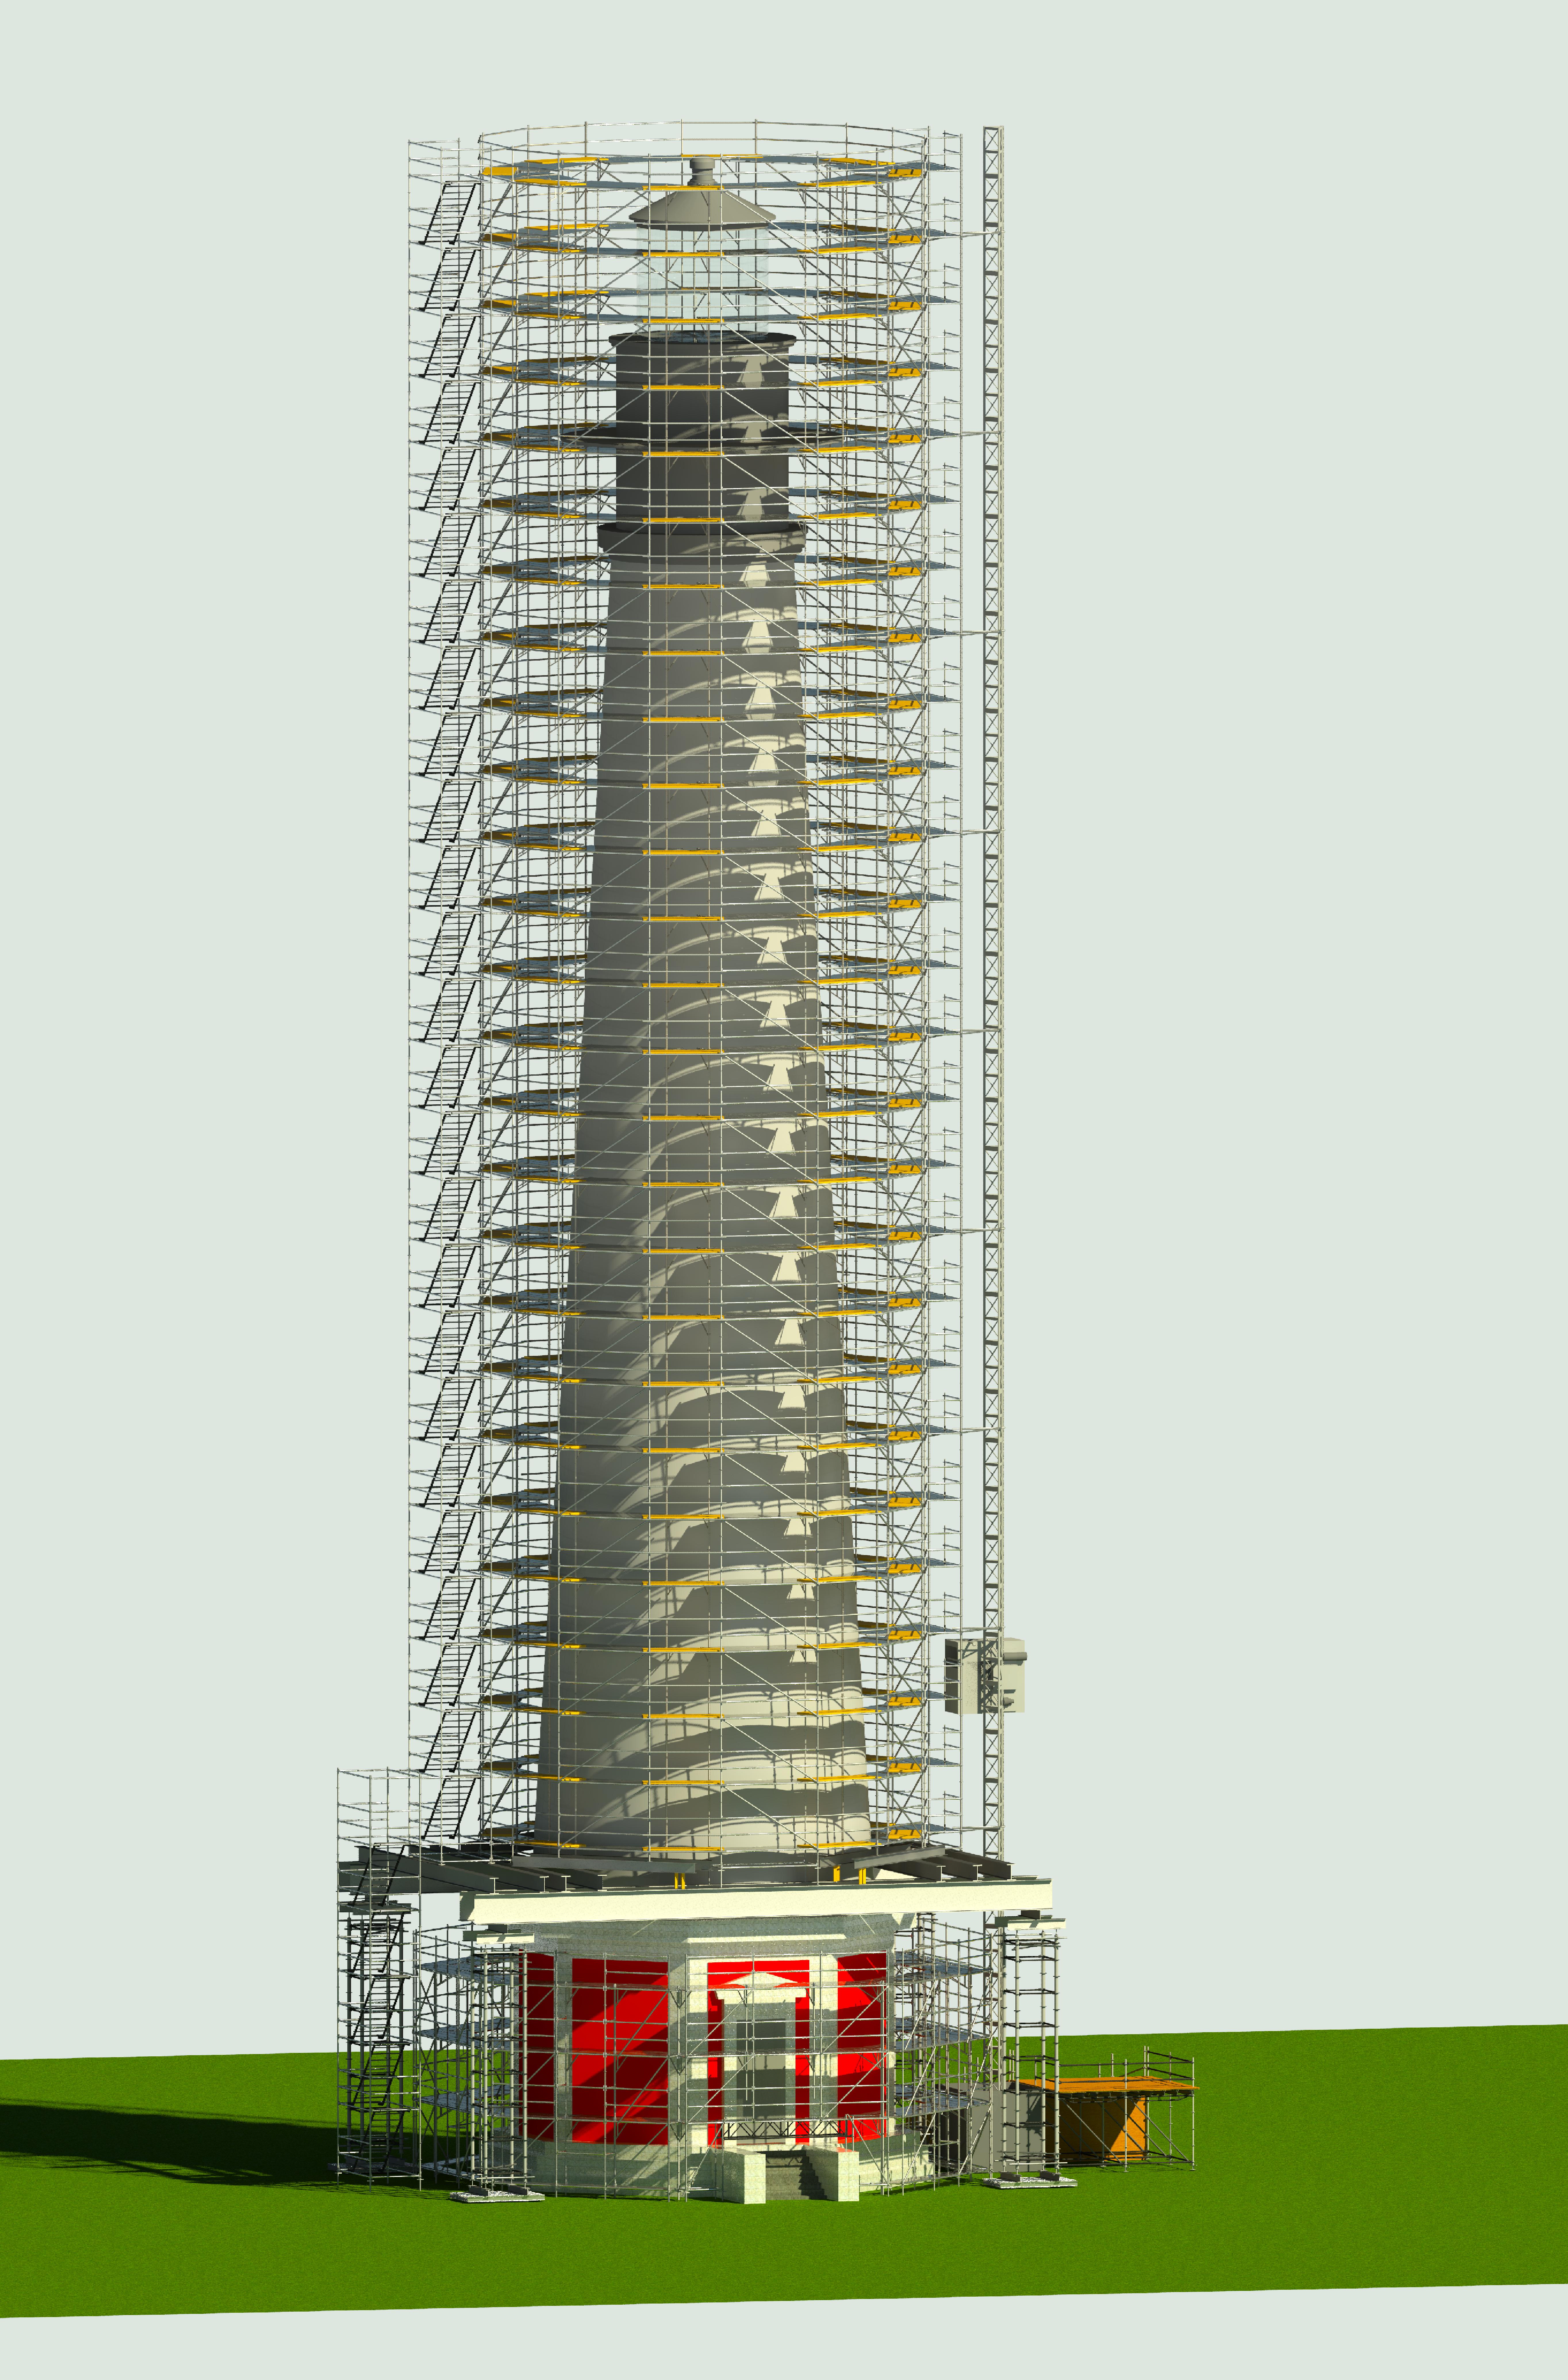 Cape Hatteras Lighthouse Scaffolding - 3D Perspective